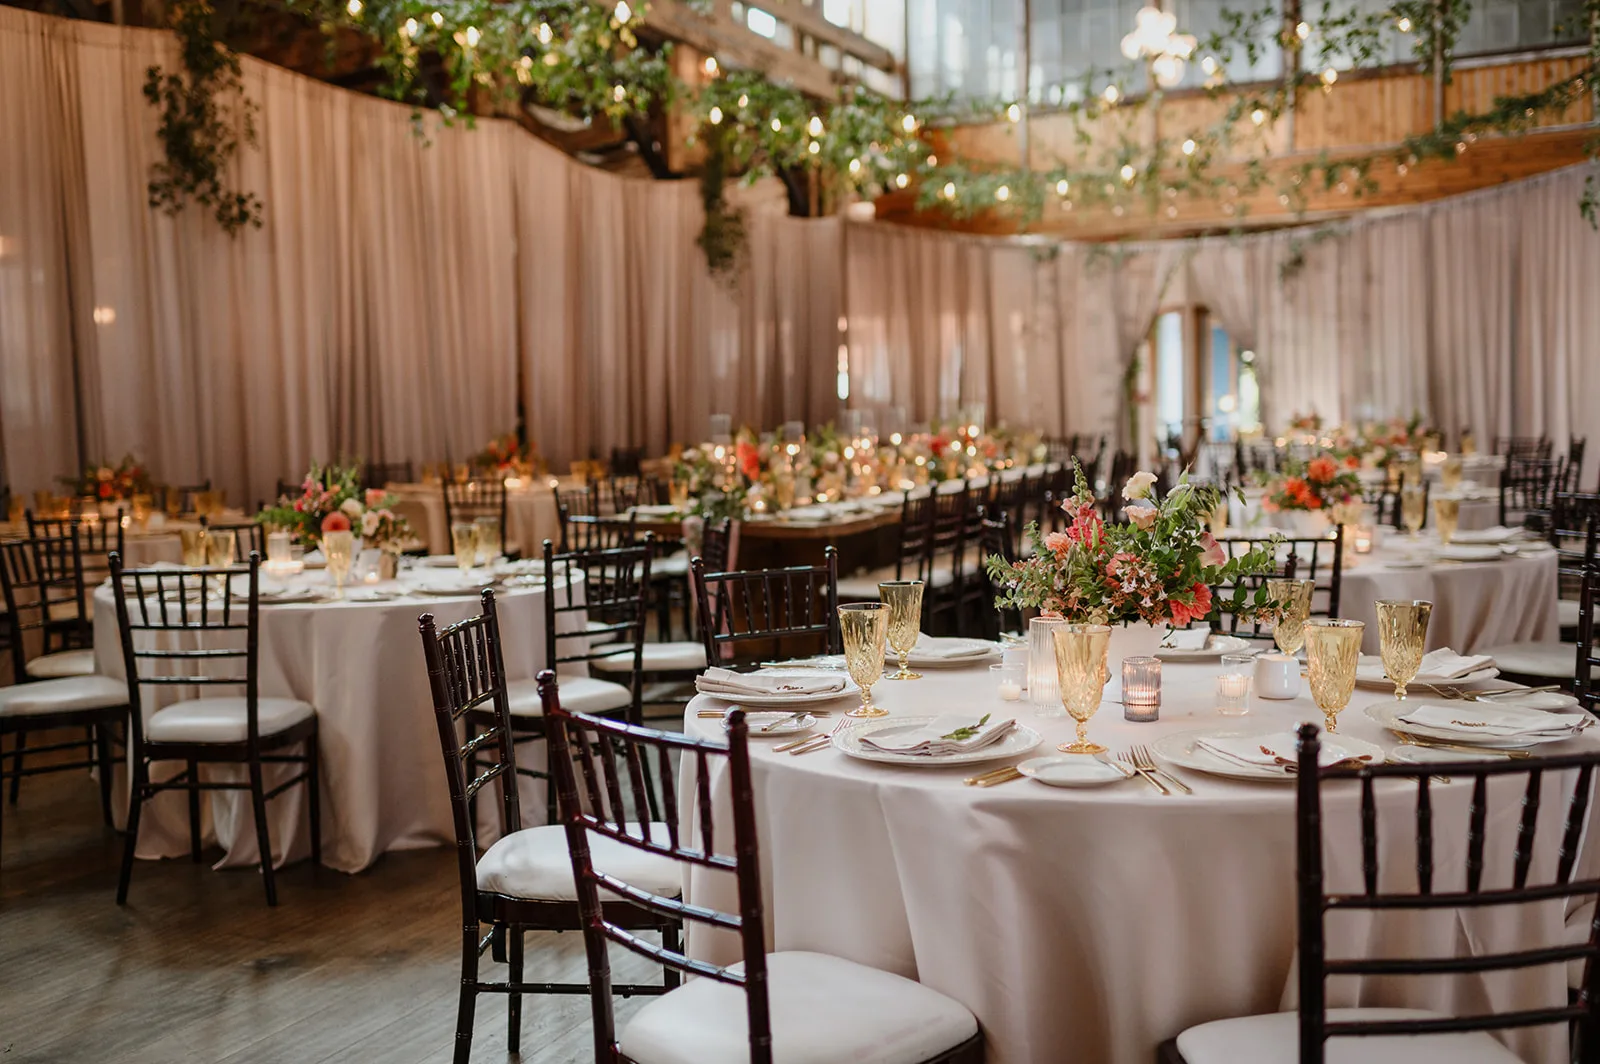 Elegant reception hall at SODO Park in Seattle, featuring round tables with floral centerpieces, string lights, and draped curtains creating a grand and sophisticated atmosphere.